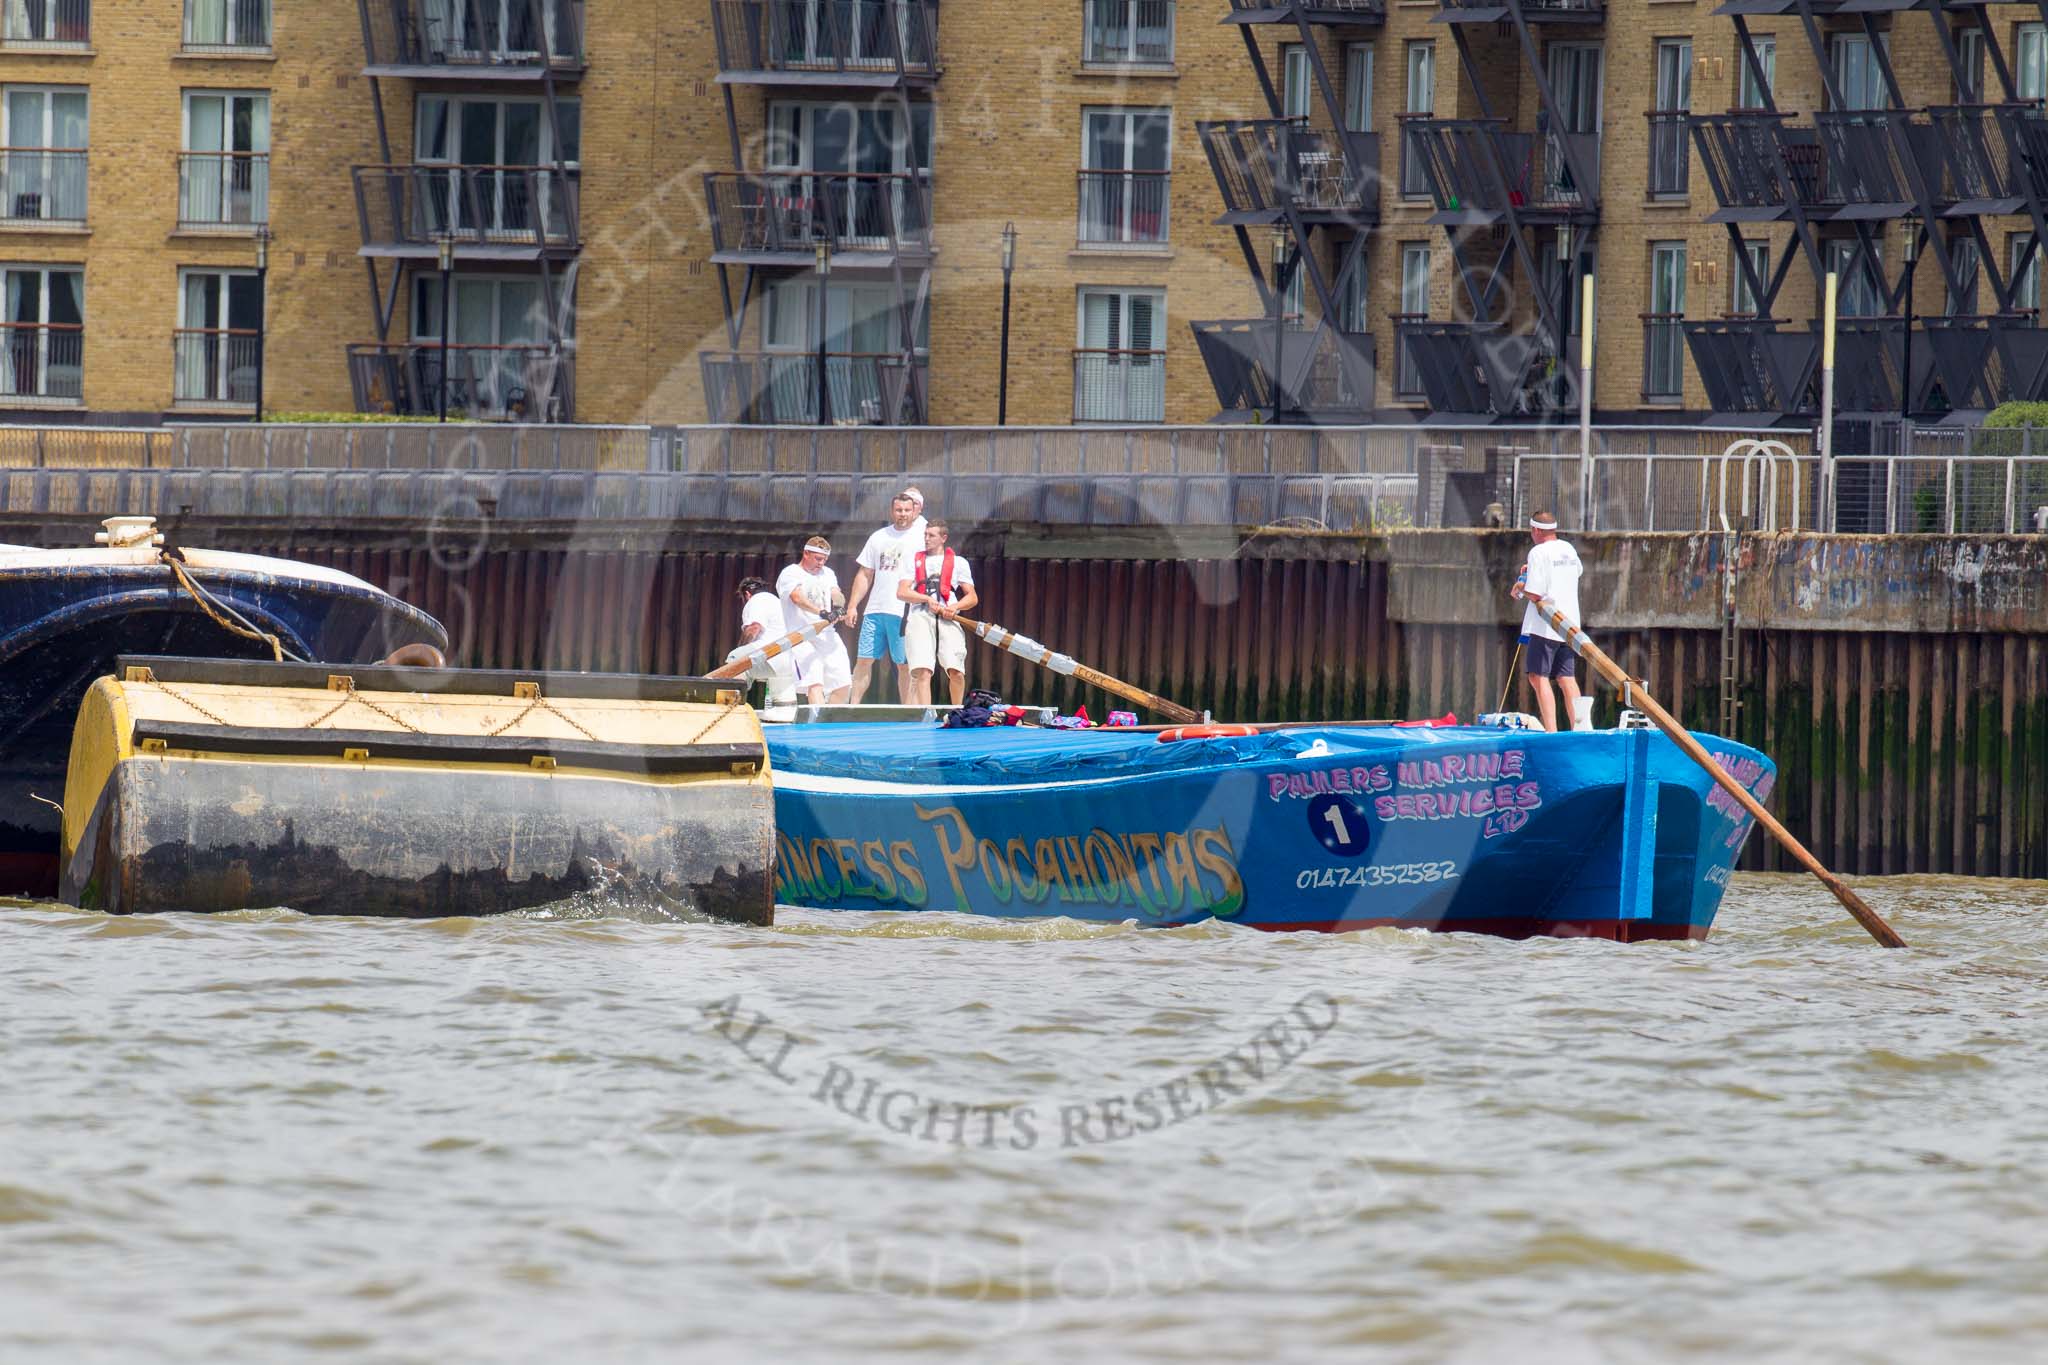 TOW River Thames Barge Driving Race 2014.
River Thames between Greenwich and Westminster,
London,

United Kingdom,
on 28 June 2014 at 12:43, image #126